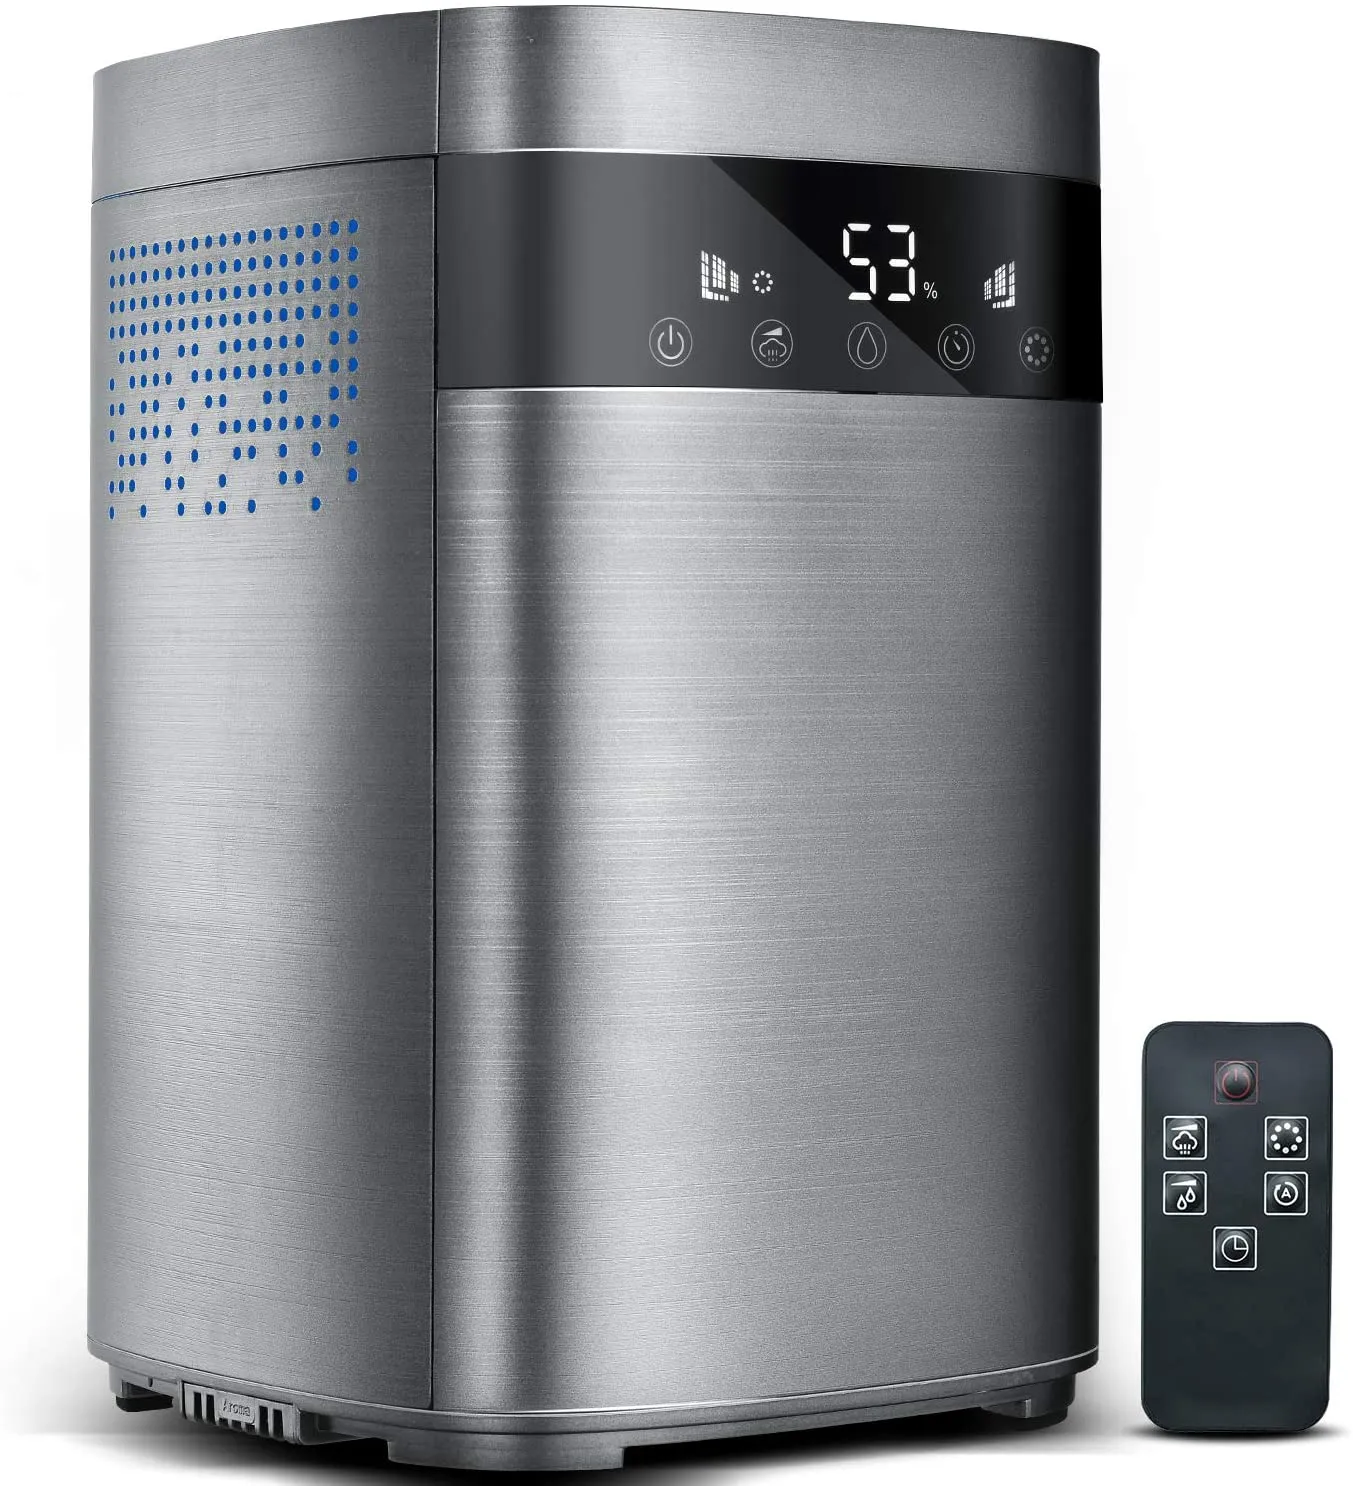 This beautiful Top-Filling warm and cool mist office humidifier has a led display, a sleep mode, and is superbly stylish.